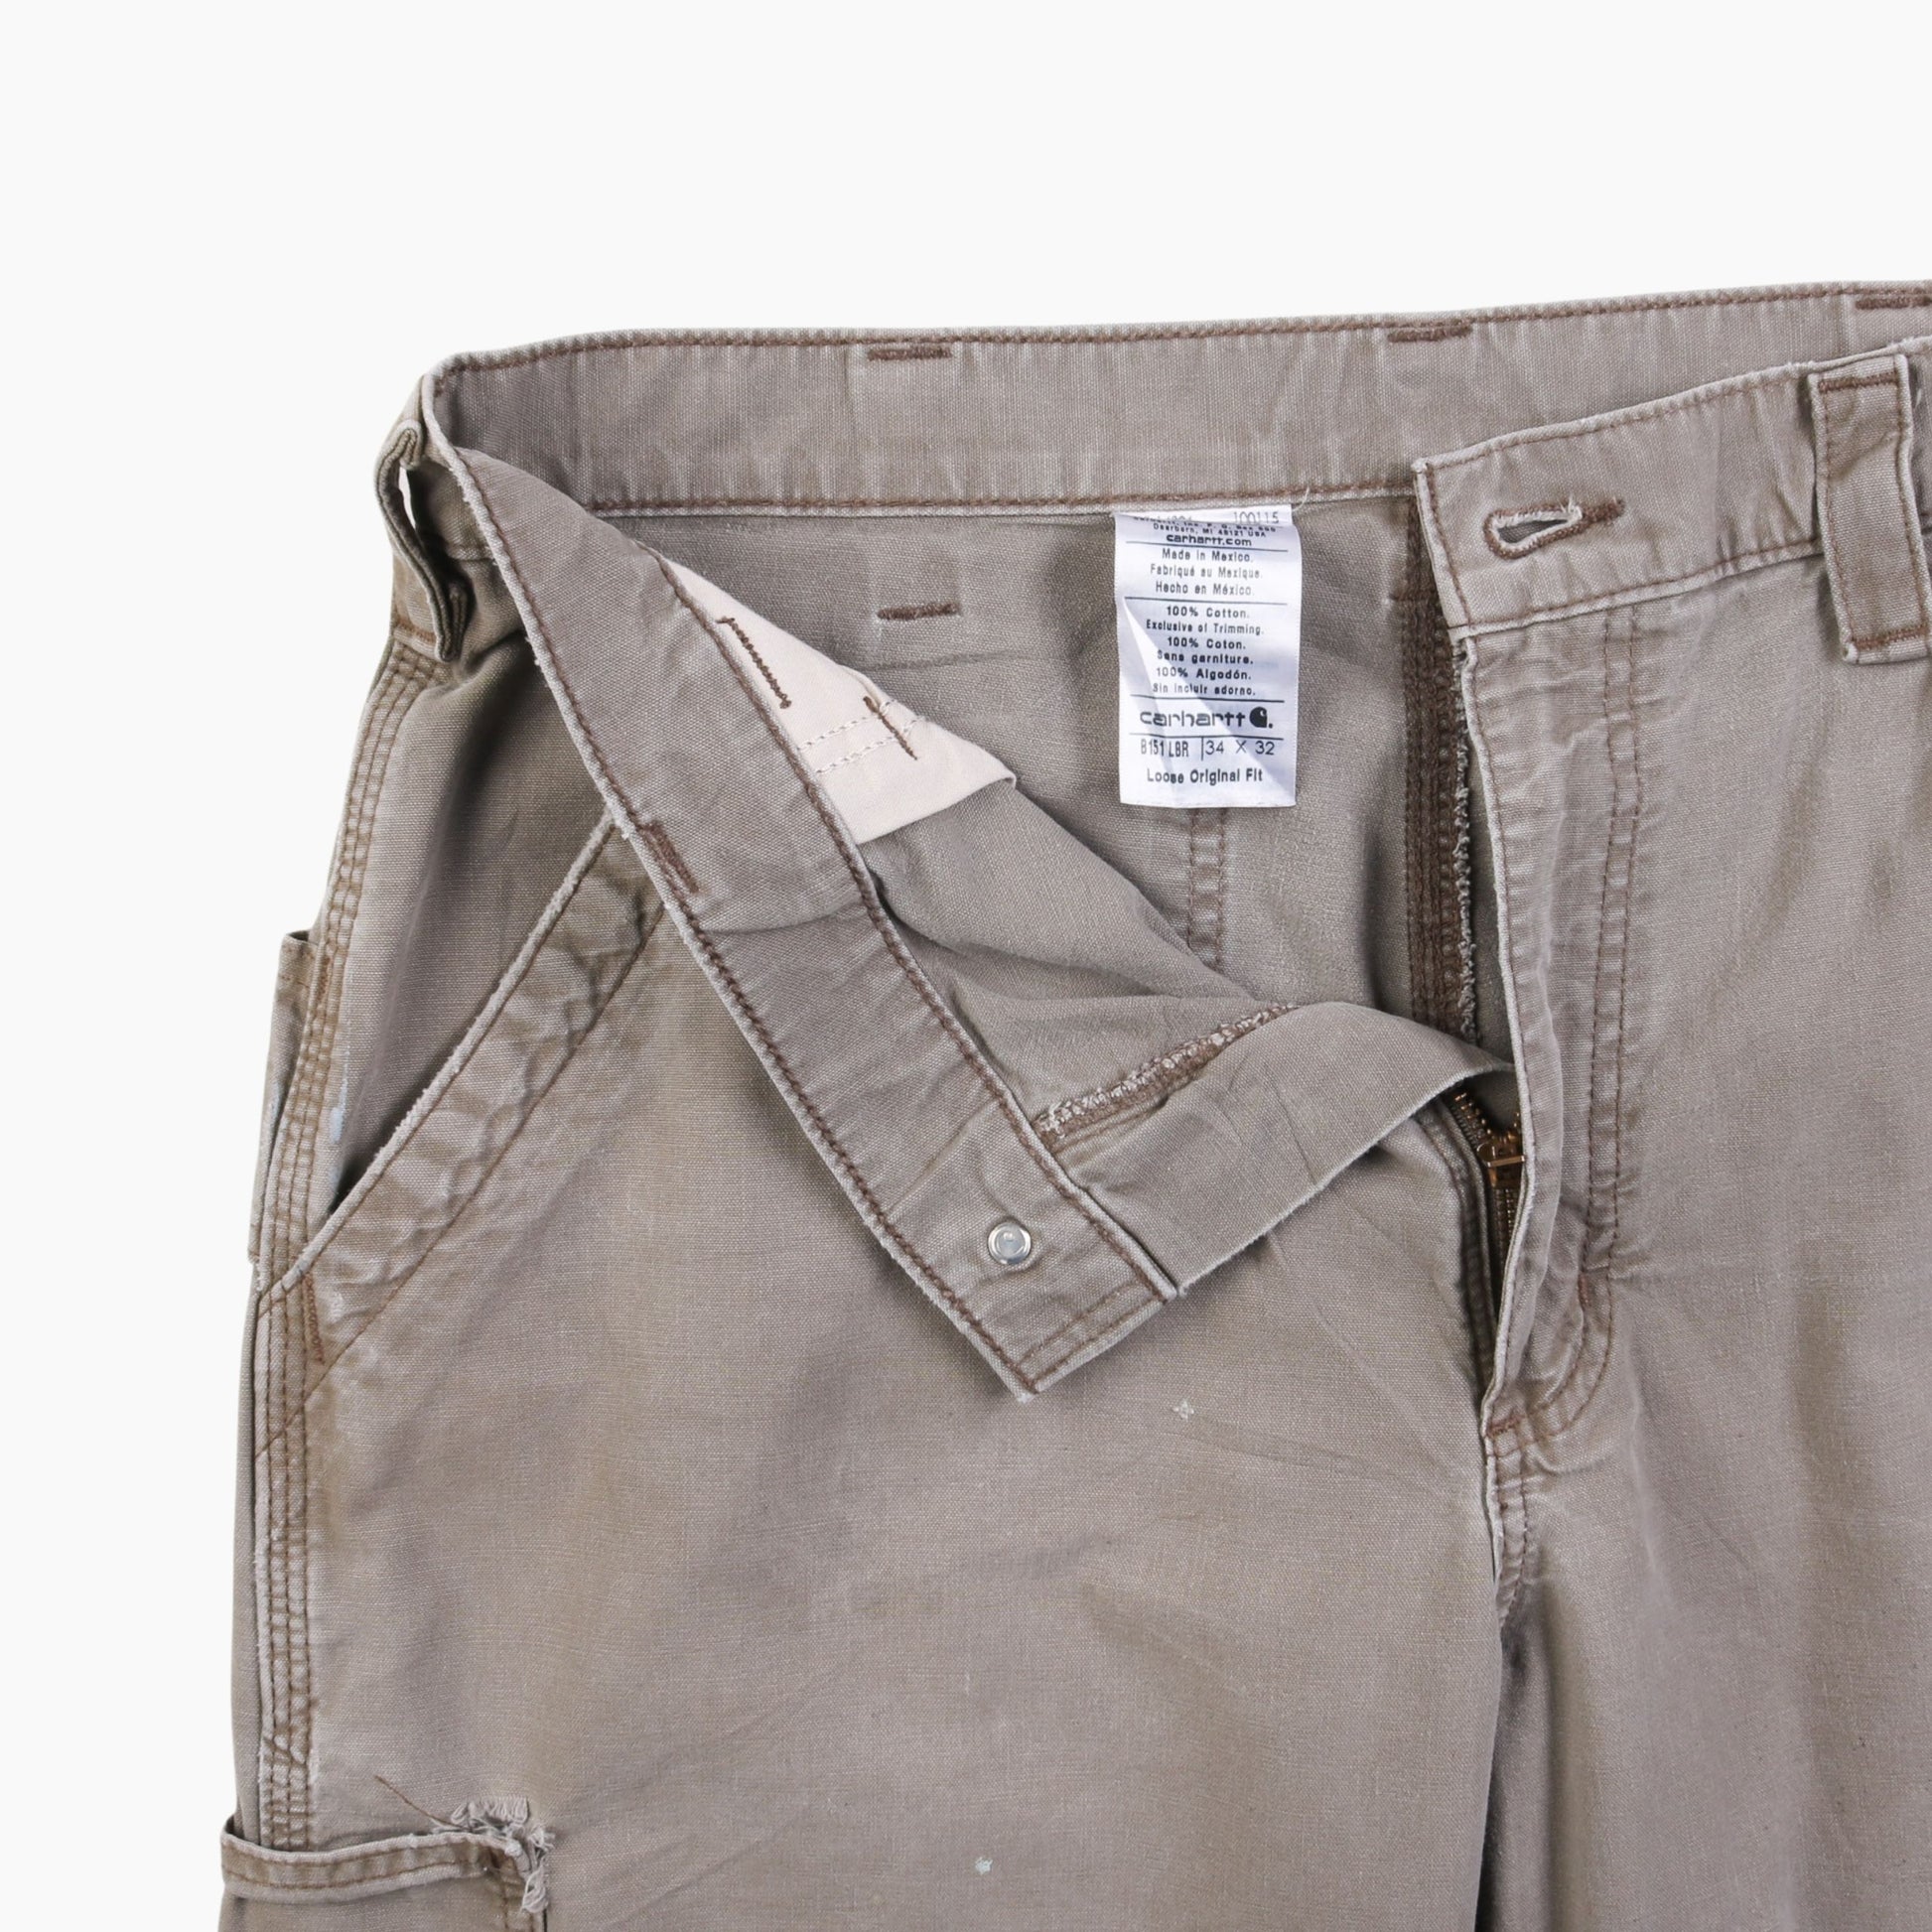 Vintage Carpenter Pants - Washed Brown - 34/32 - American Madness